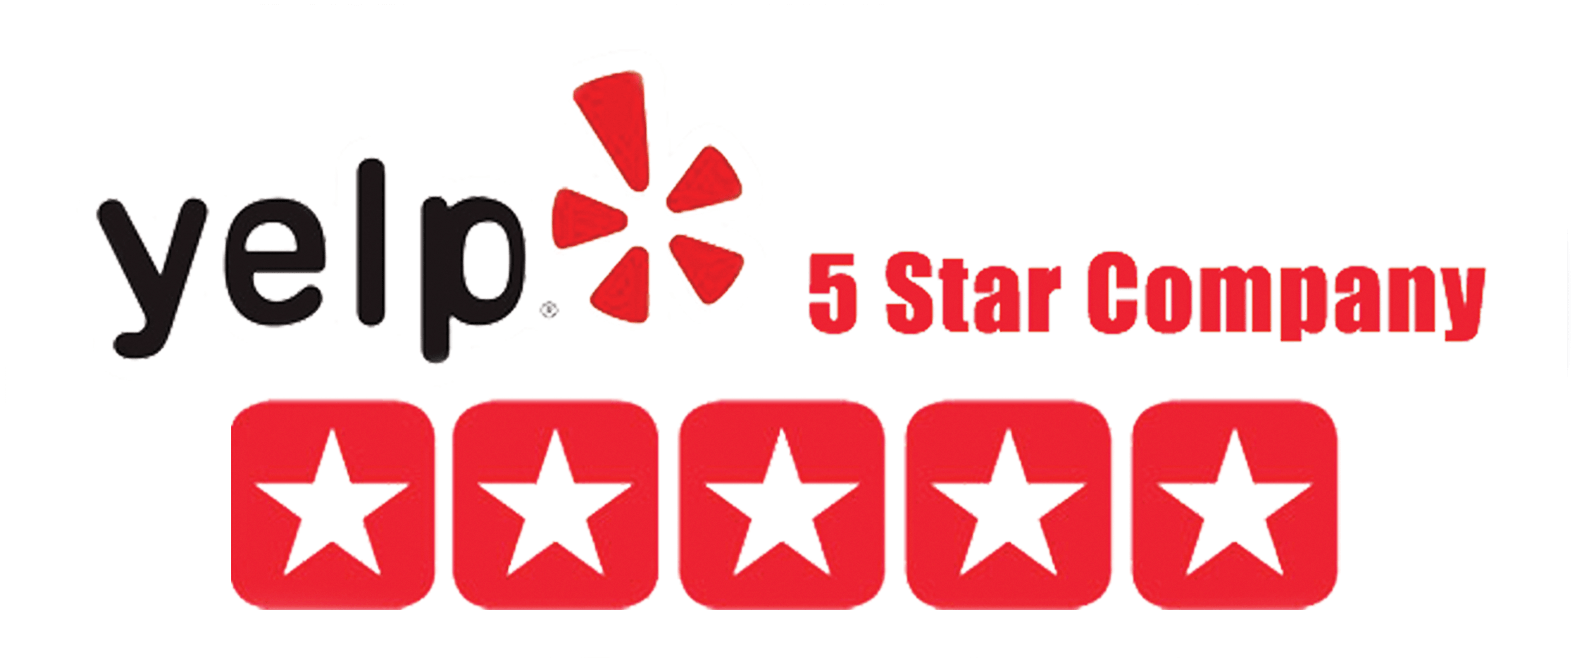 Star company. Co Star. Yelp logo PNG.